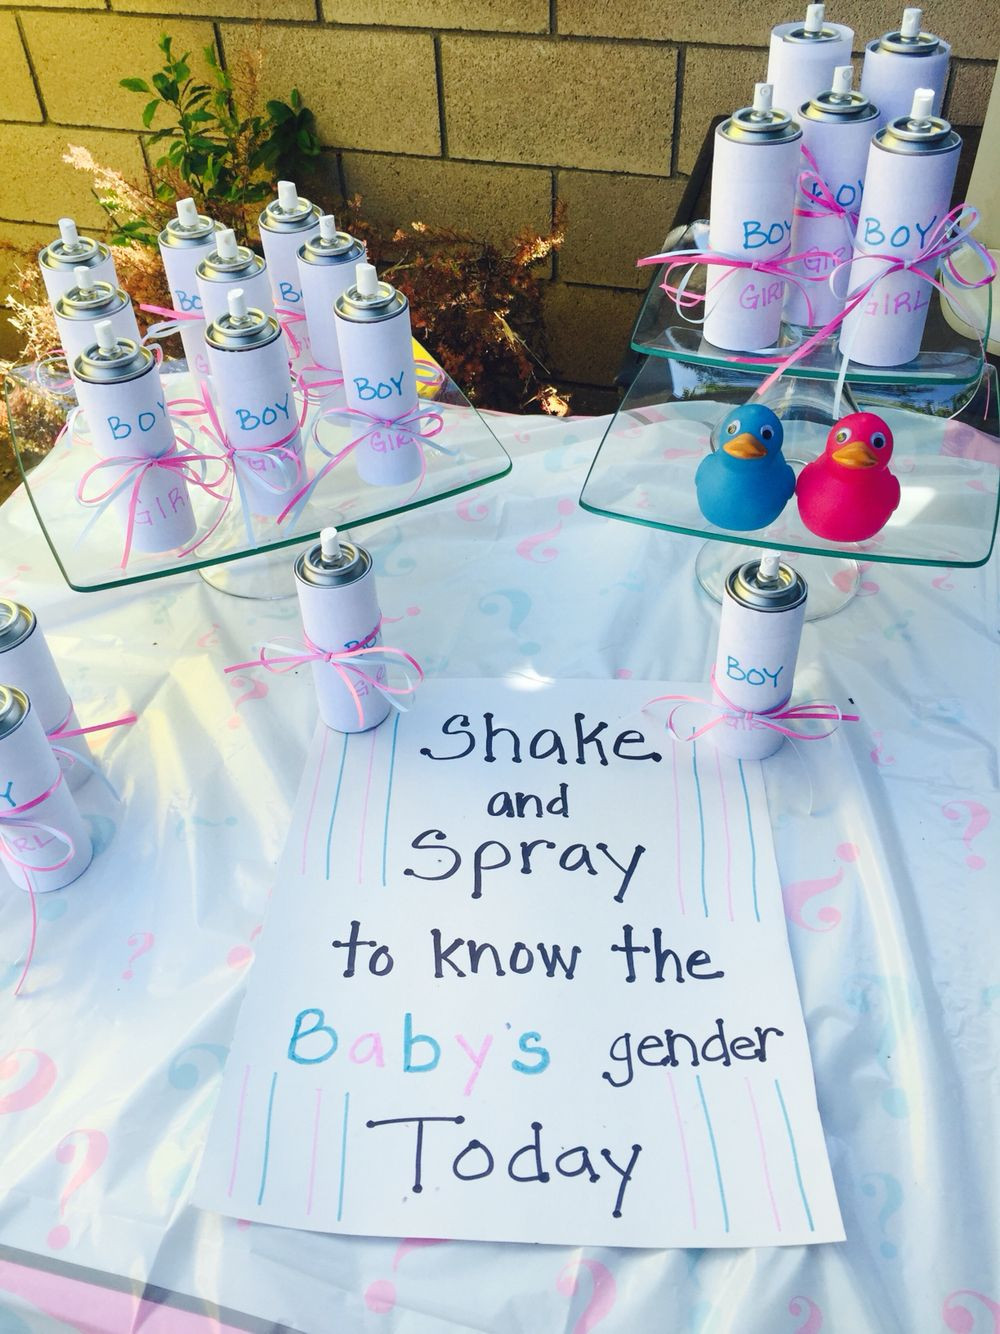 Baby Gender Reveal Party Ideas Pinterest
 Gender reveal sillystring Party ideas